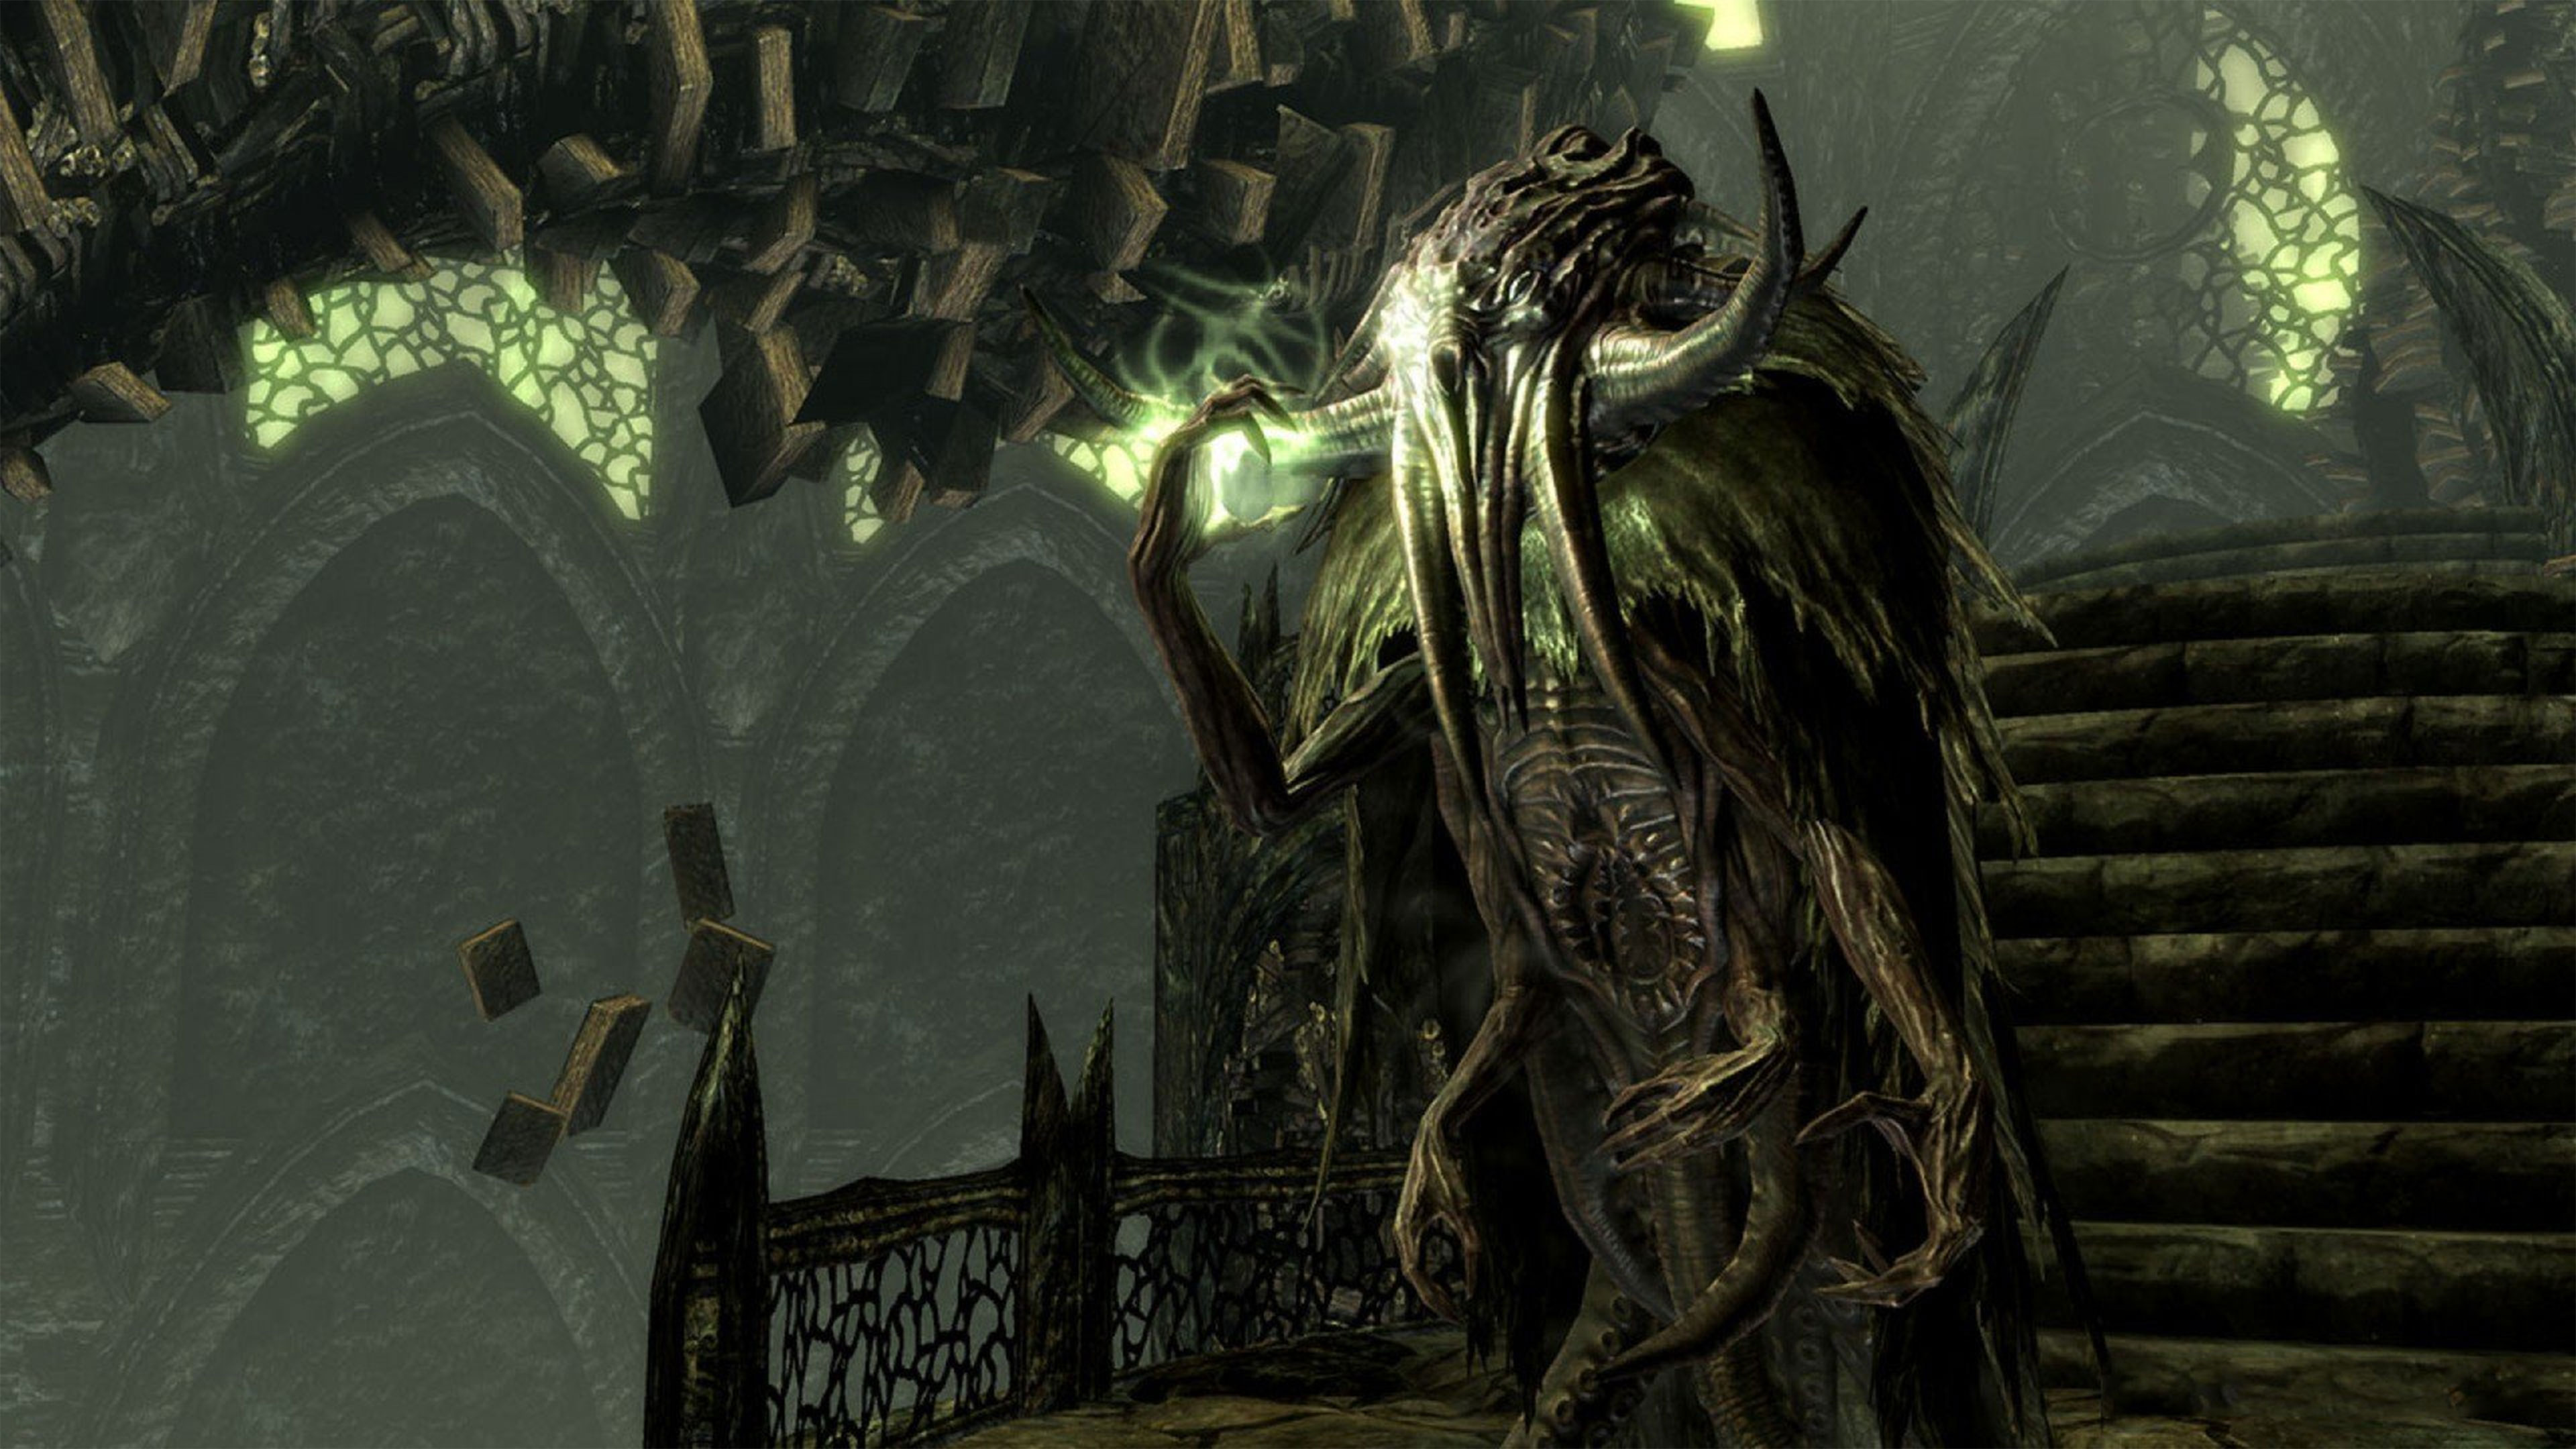 Call Of Cthulhu Wallpaper Galleryhip The